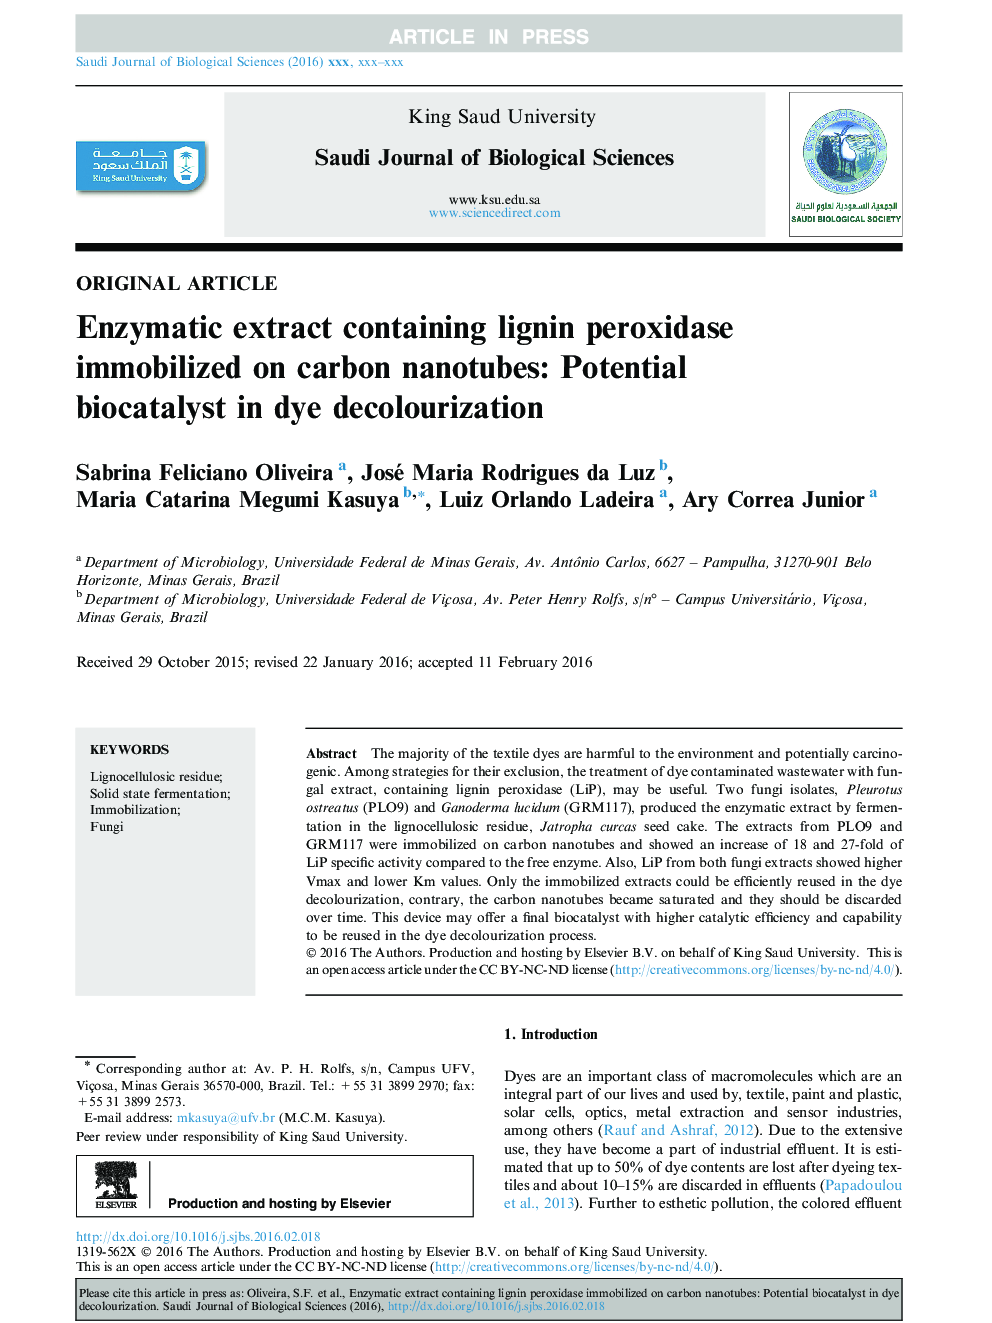 Enzymatic extract containing lignin peroxidase immobilized on carbon nanotubes: Potential biocatalyst in dye decolourization